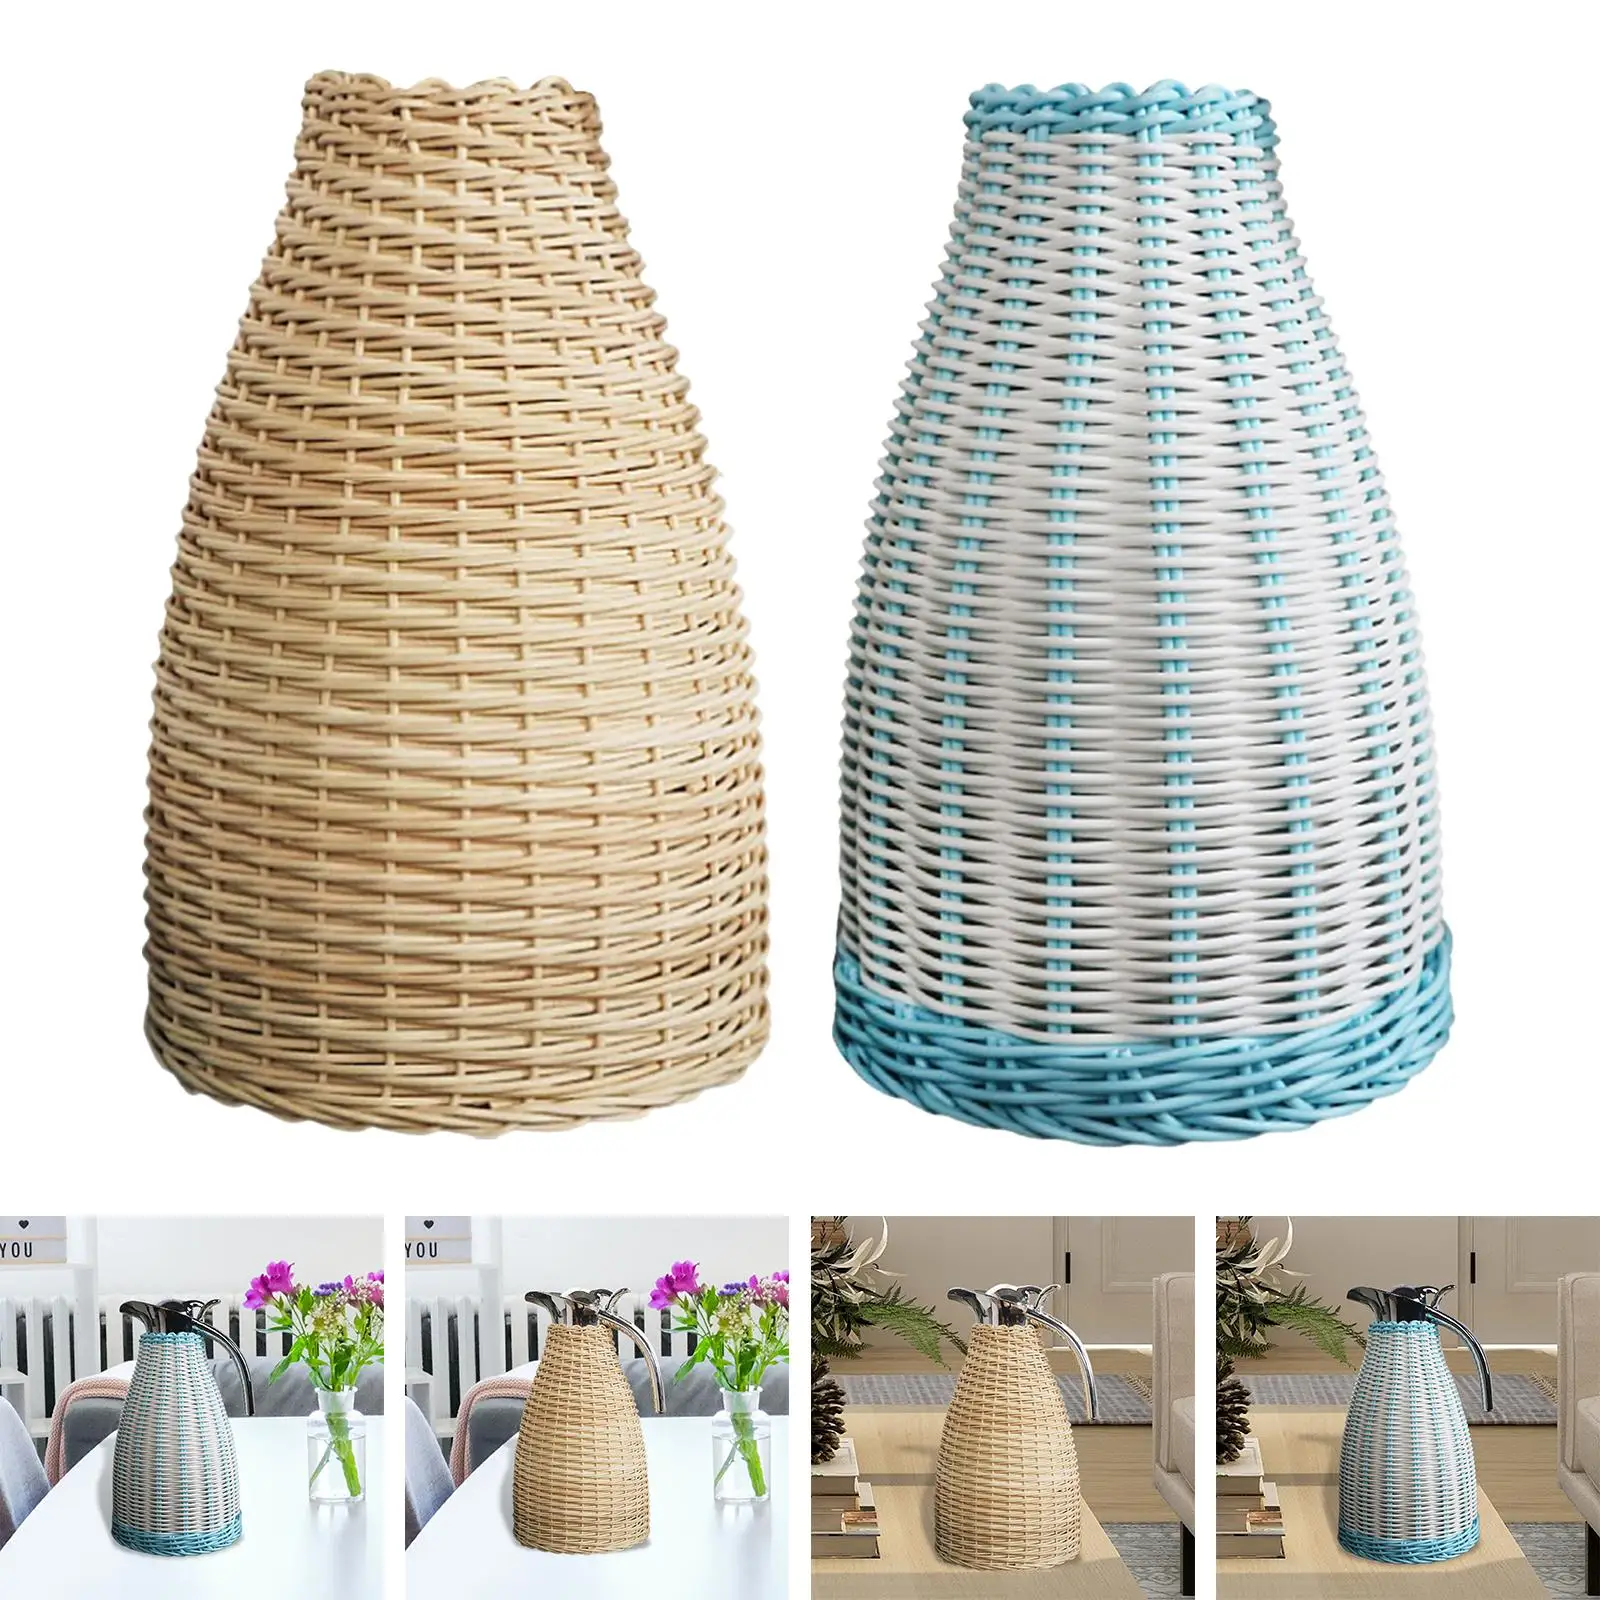 Handmade Rattan flasks cover Decoration Thermal Jug Insulated Kettle Sleeve for Chairs Farms Roofs Restaurants Homestay